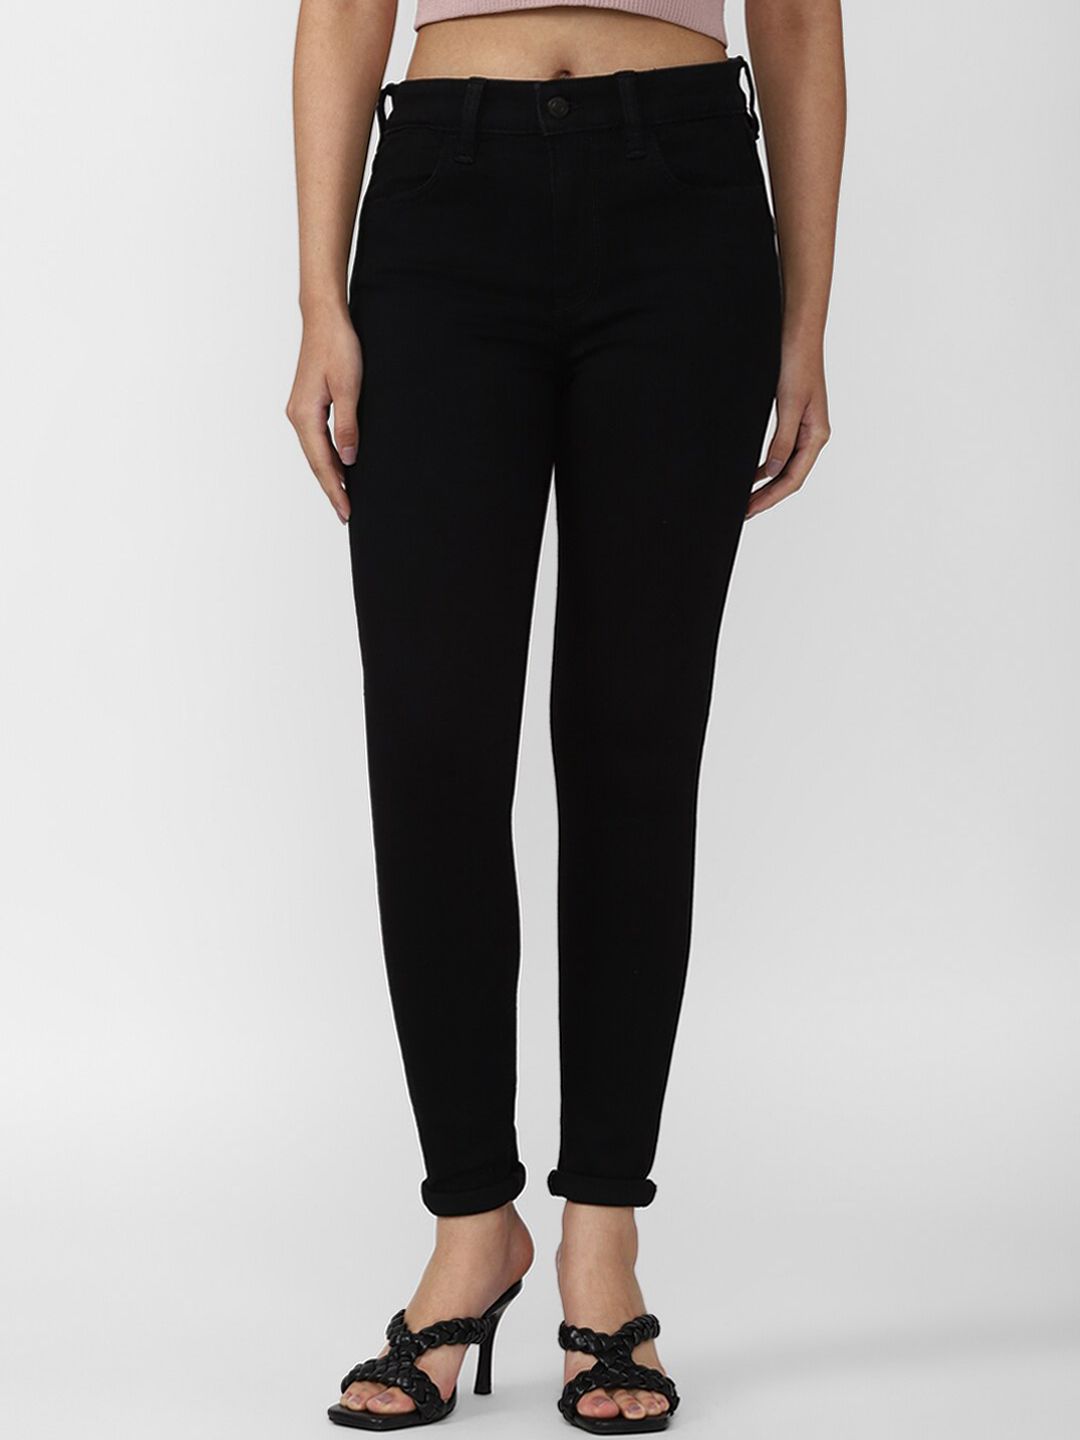 AMERICAN EAGLE OUTFITTERS Women Black Slim Fit Jeans Price in India